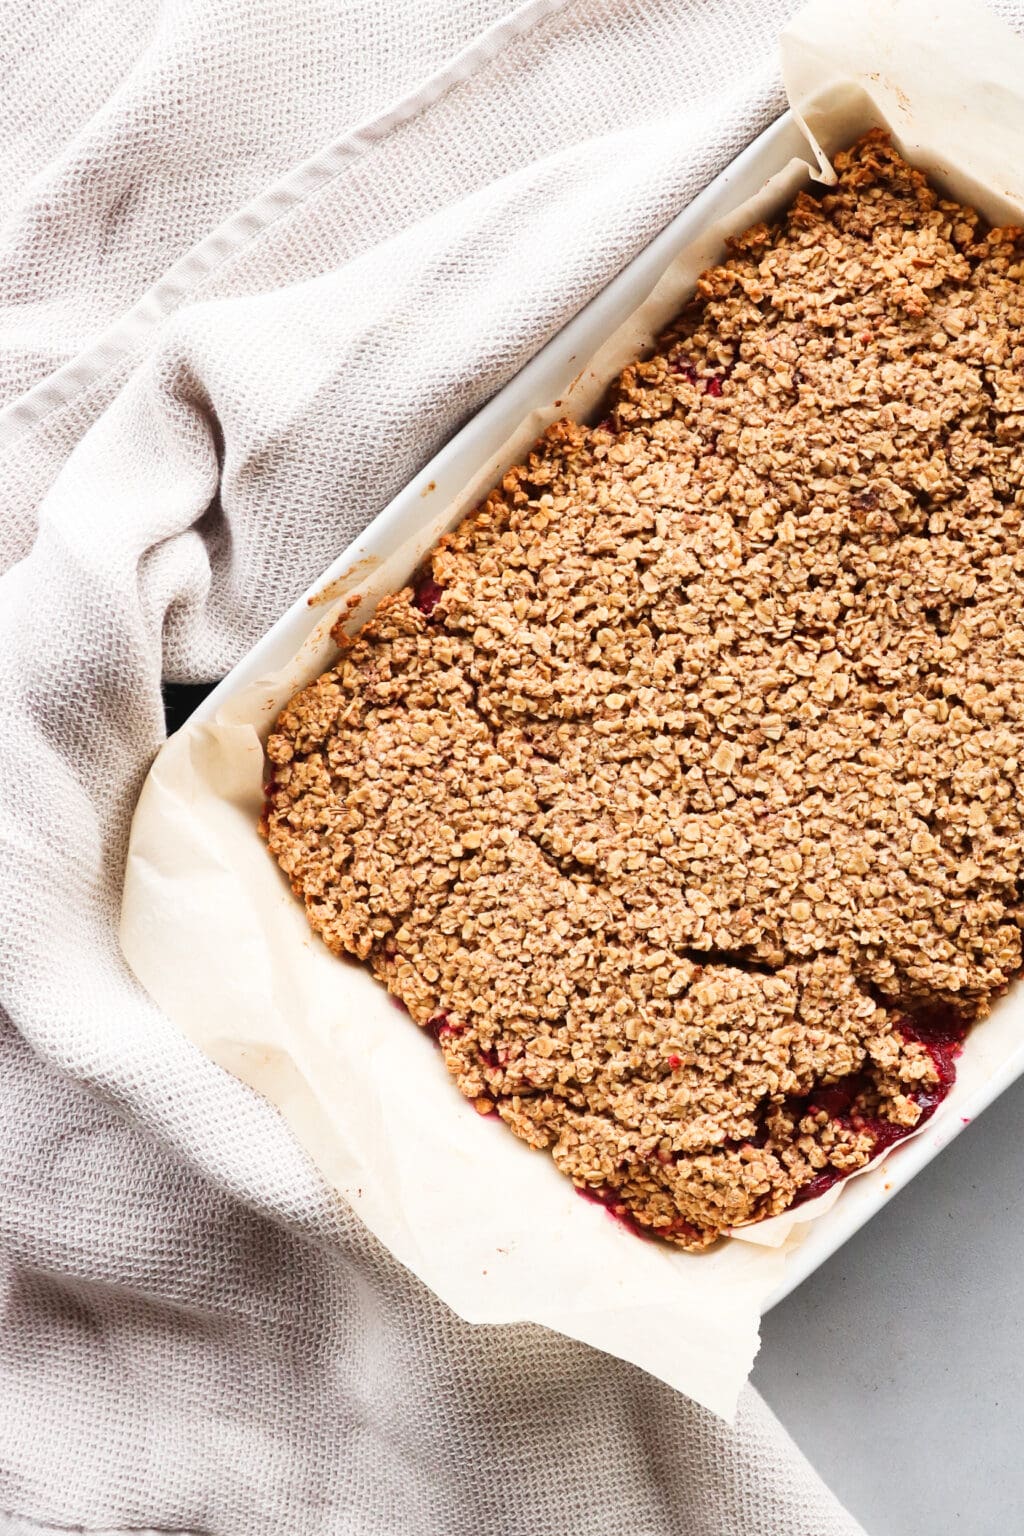 A 9 x 13 inch white baking dish contains baked cranberry oatmeal bars with cranberry sauce. The baking dish is surrounded by an off-white dish towel